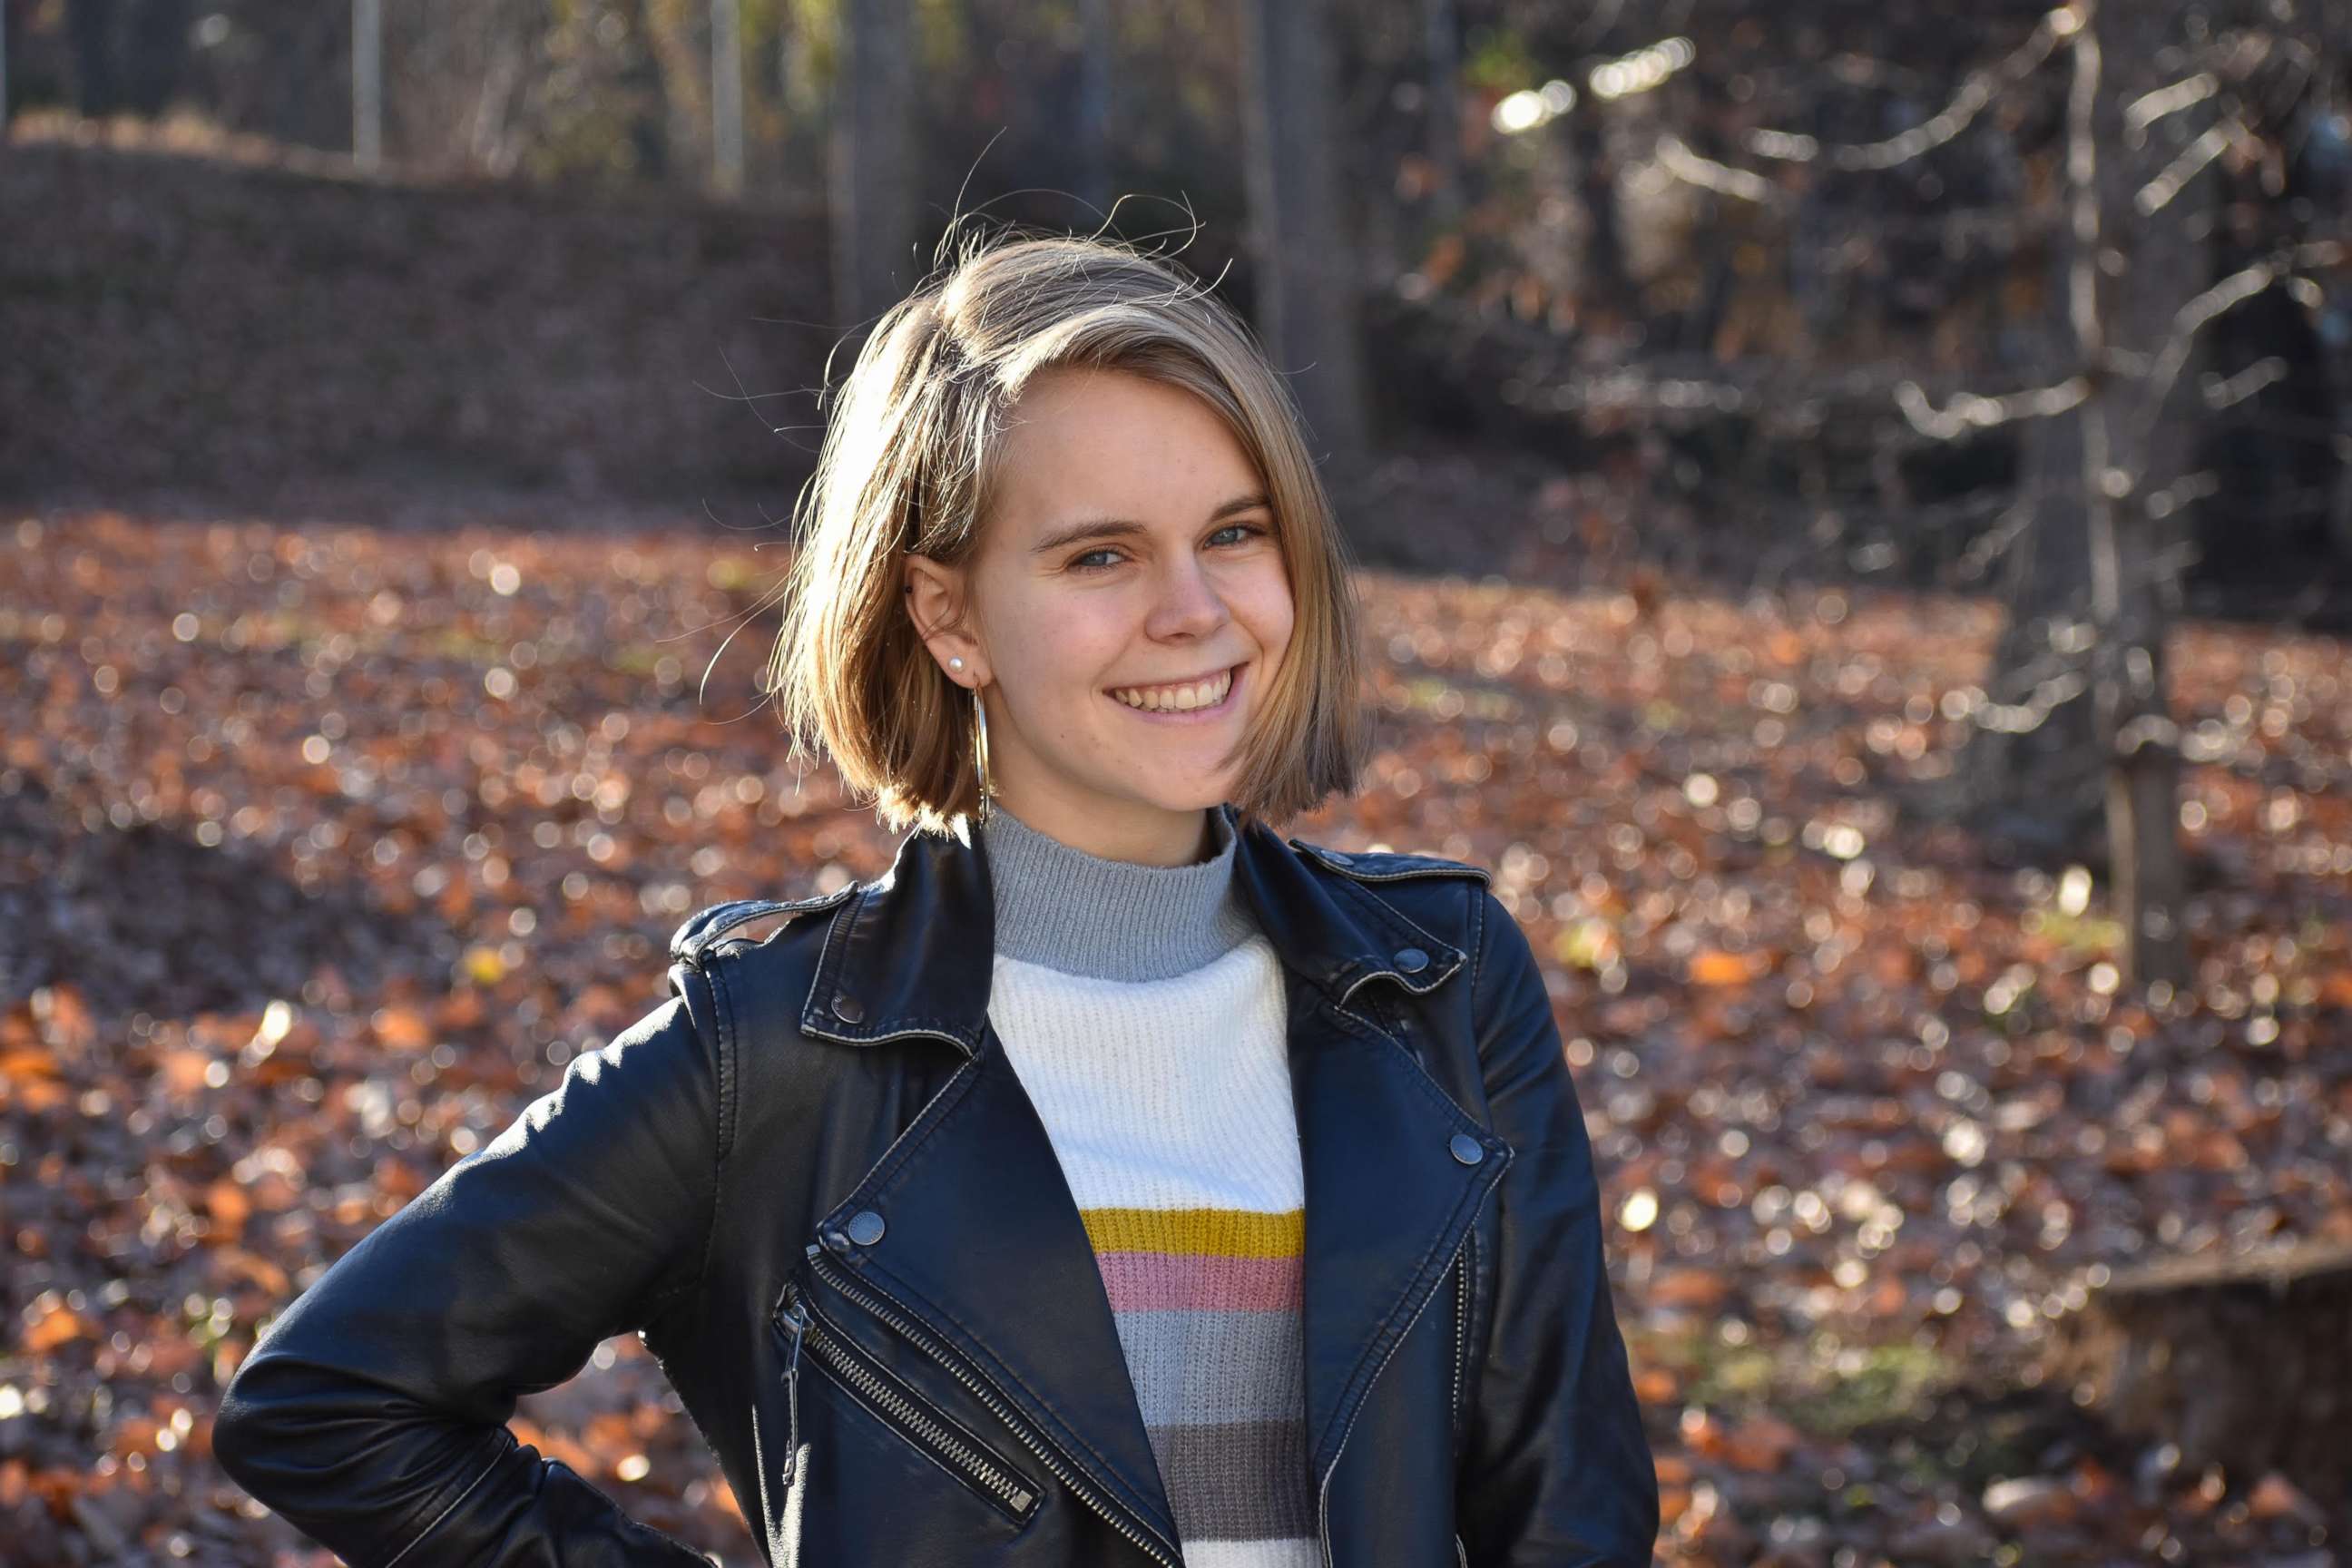 PHOTO: An undated photo shows Tessa Majors, an 18-year old Barnard College student who died after she was stabbed in Morningside Park in Upper Manhattan, N.Y., Dec. 11, 2019.